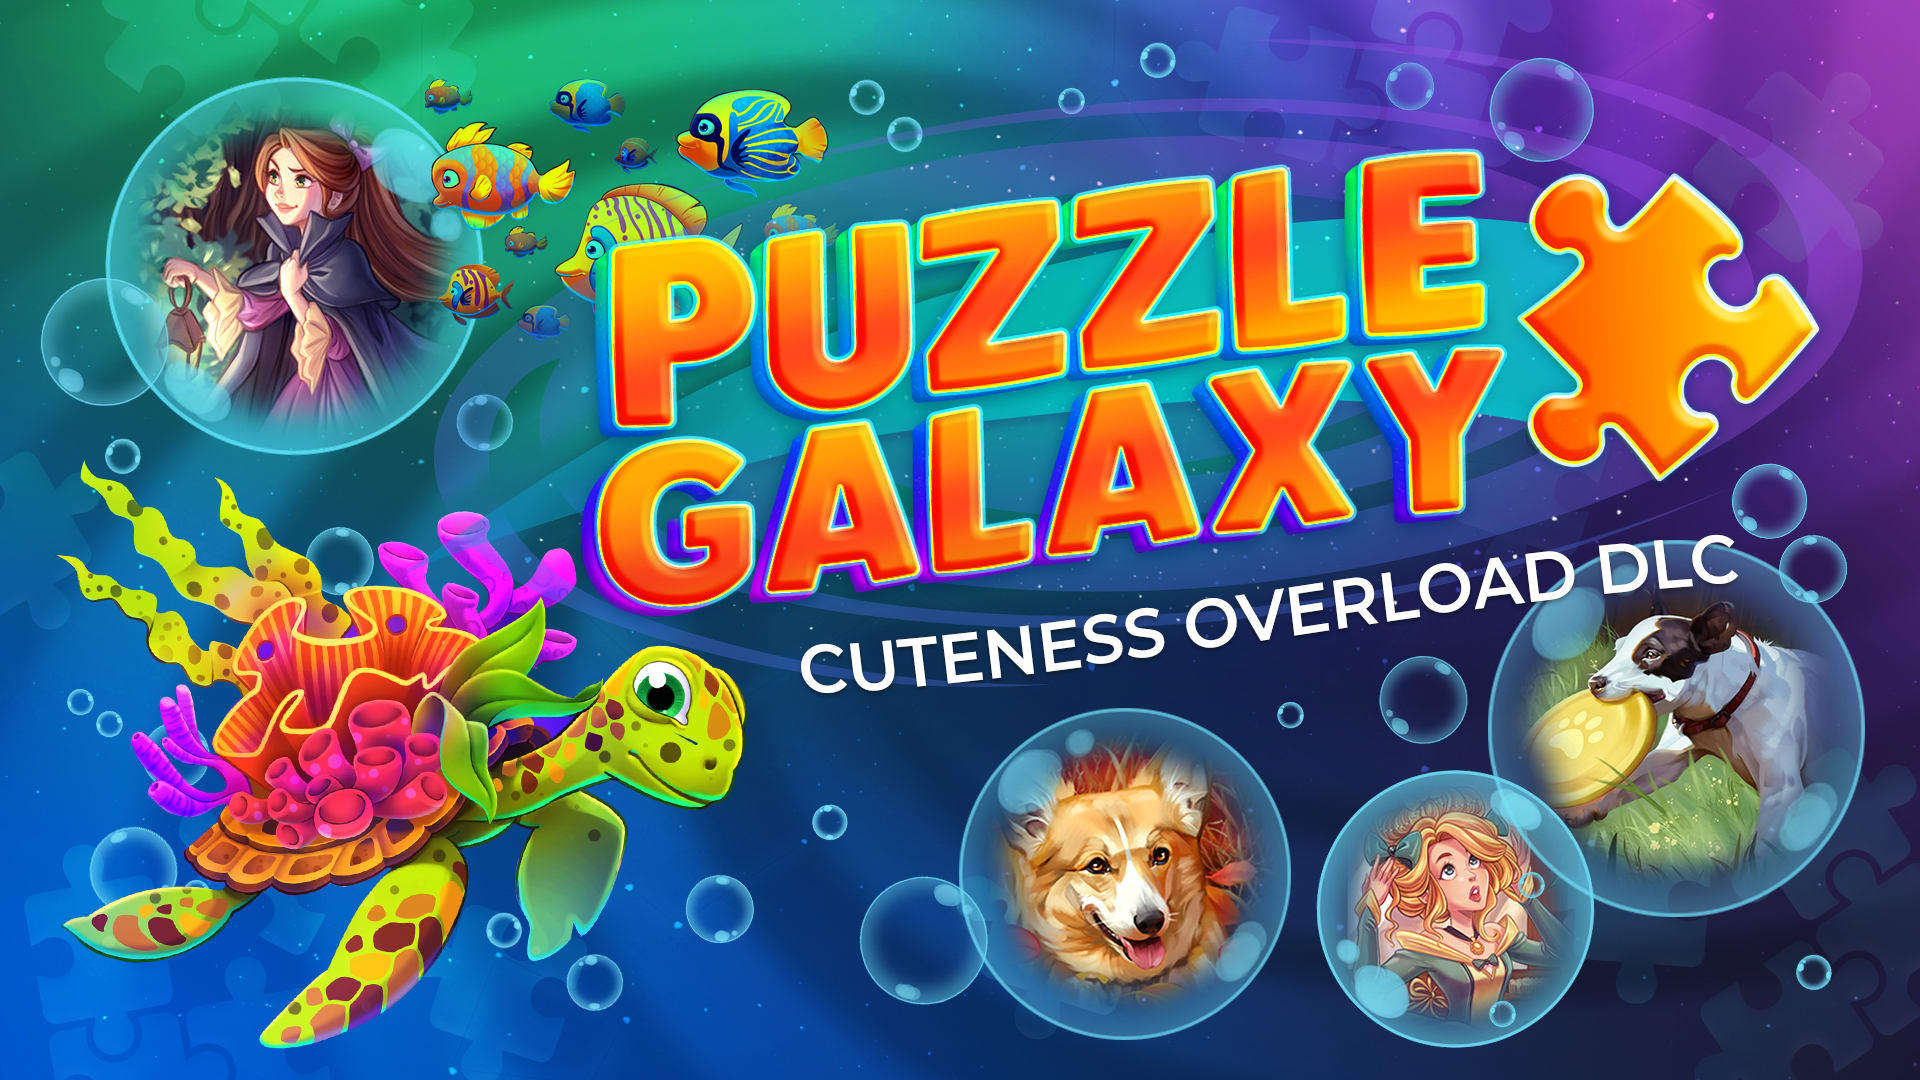 Puzzle Galaxy: Cuteness Overload - 22 new puzzles